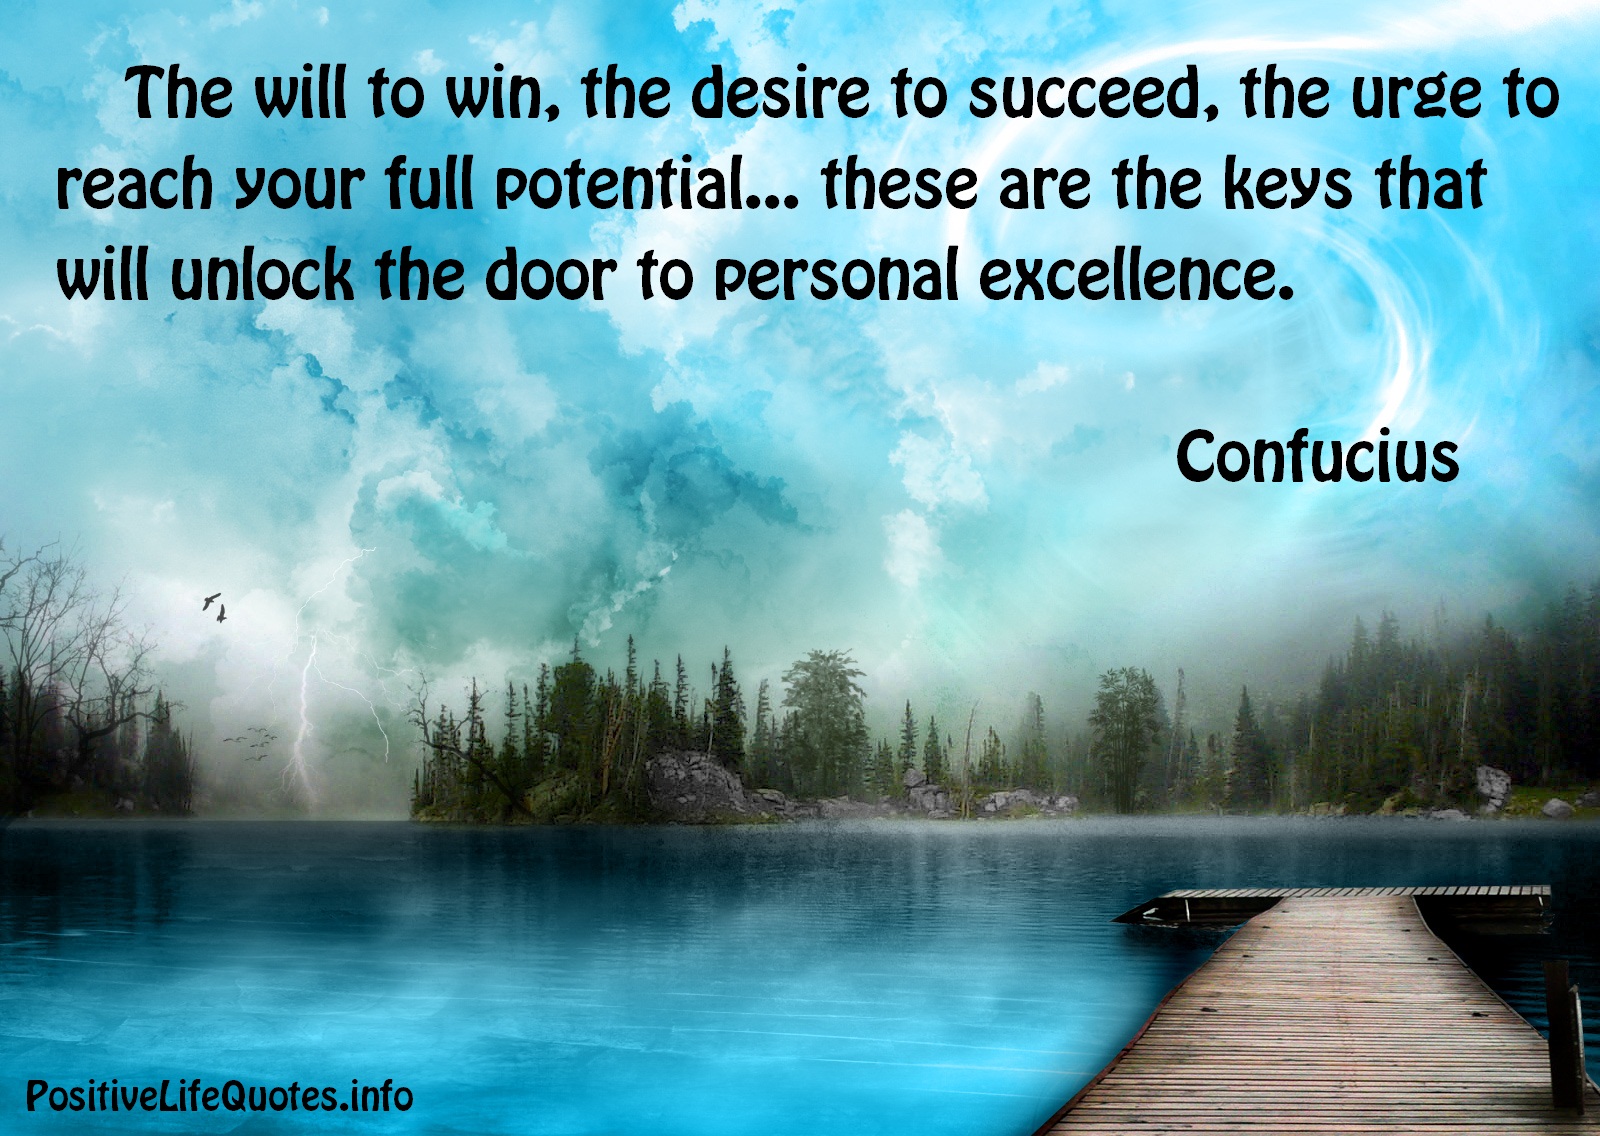 The will to win, the desire to succeed, the urge to reach your full potential… these are the keys that will unlock the door to personal excellence. Confucius